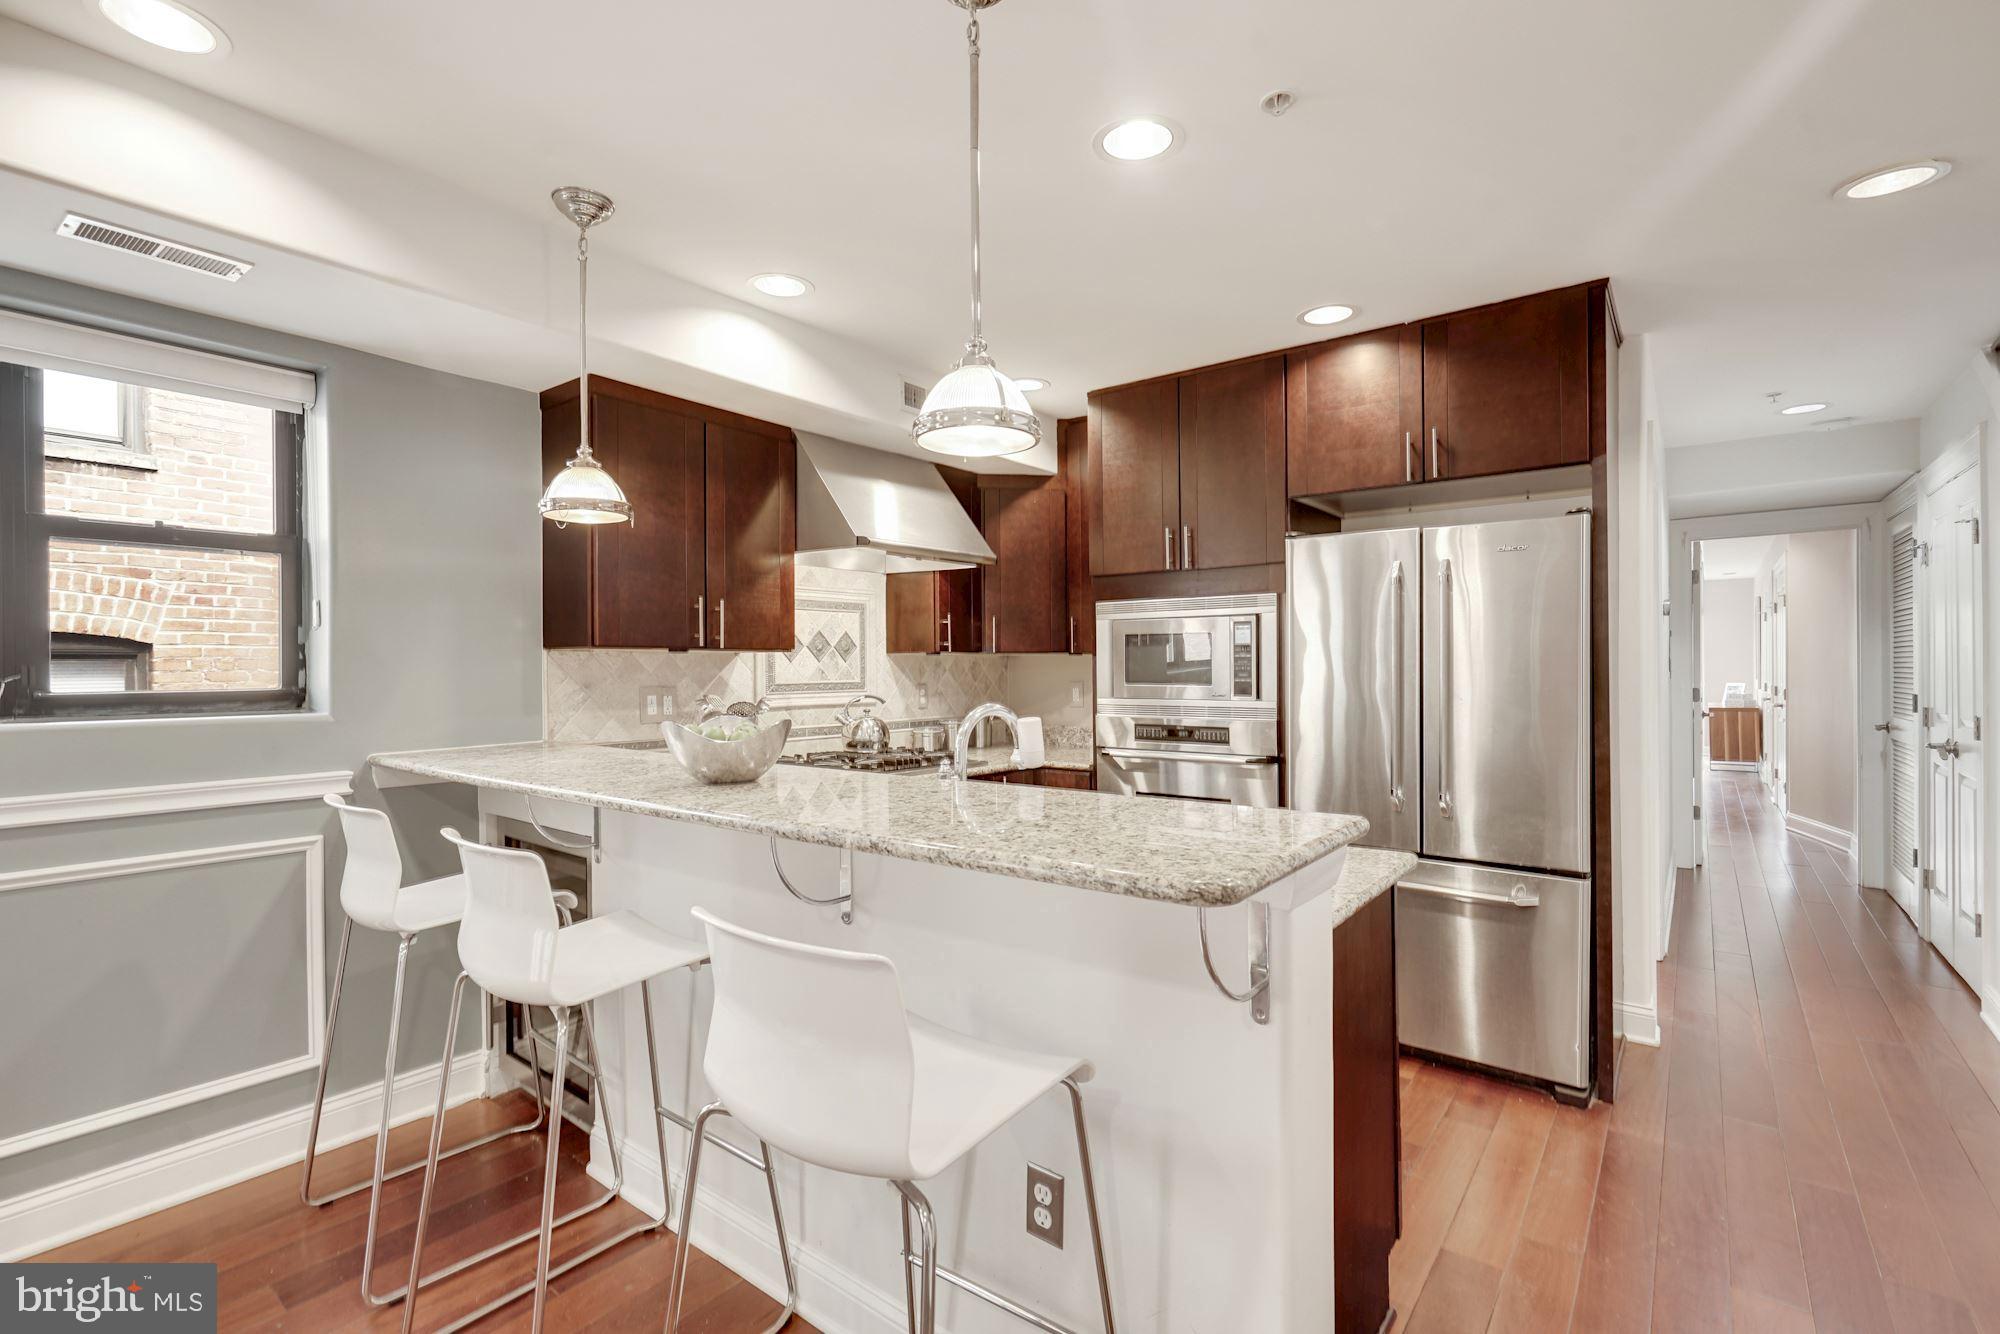 a kitchen with stainless steel appliances kitchen island granite countertop a refrigerator a sink dishwasher a stove and a refrigerator with wooden floor